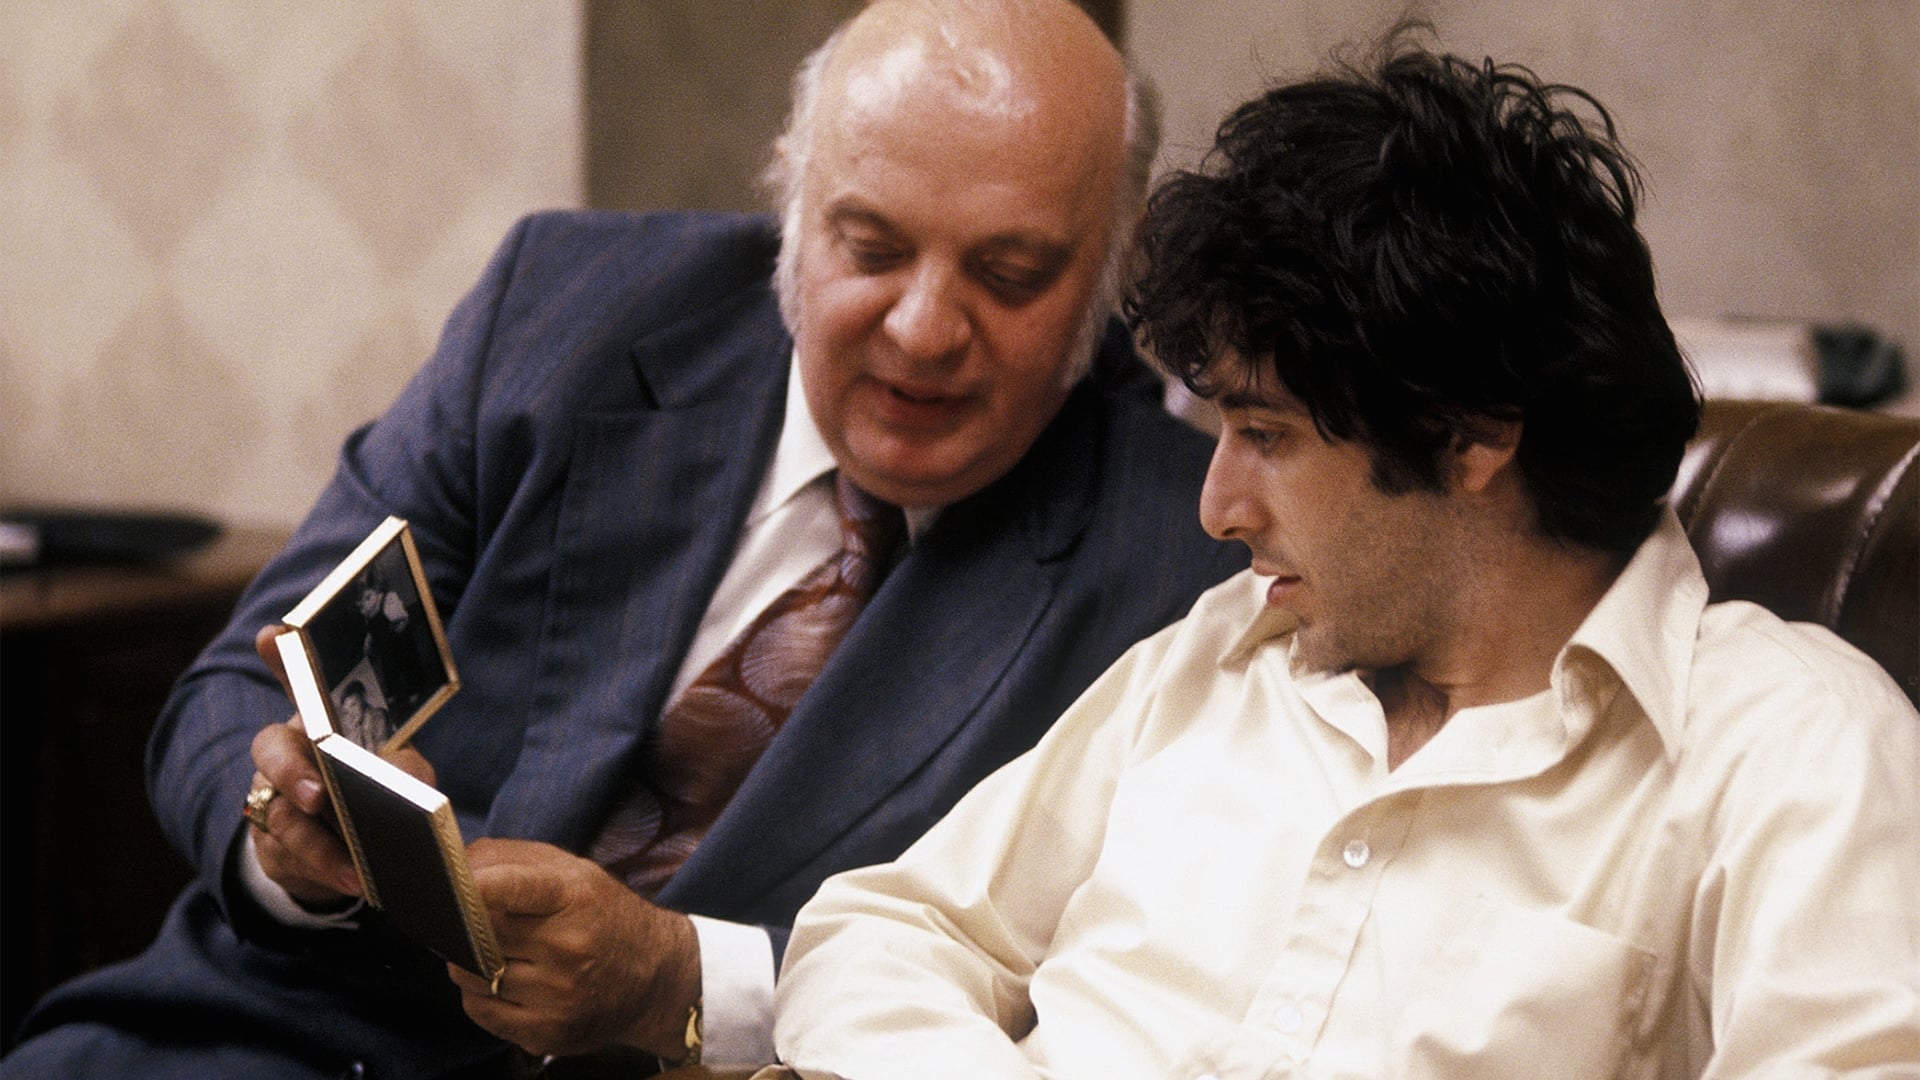 Dog day afternoon 720p subtitles torrent applying weed and feed after seeding torrent